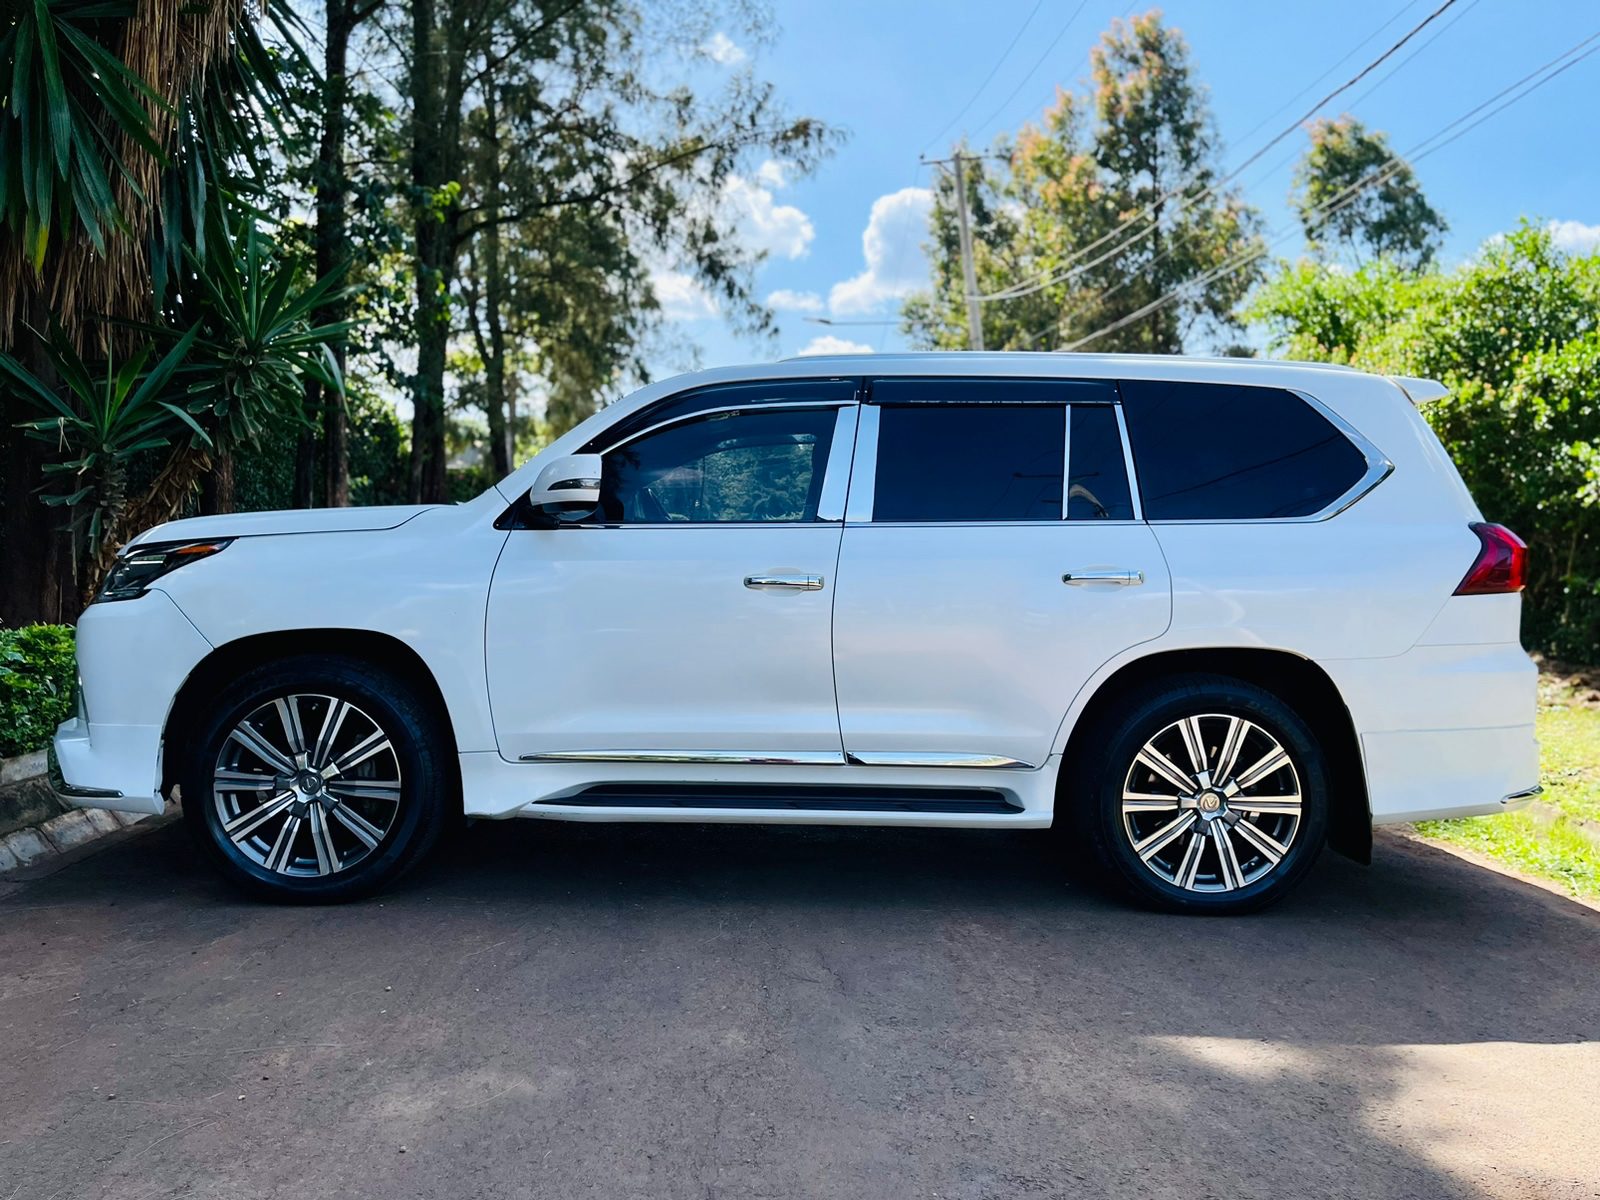 LEXUS LX 570 2016 Fully Loaded Exclusive CHEAPEST